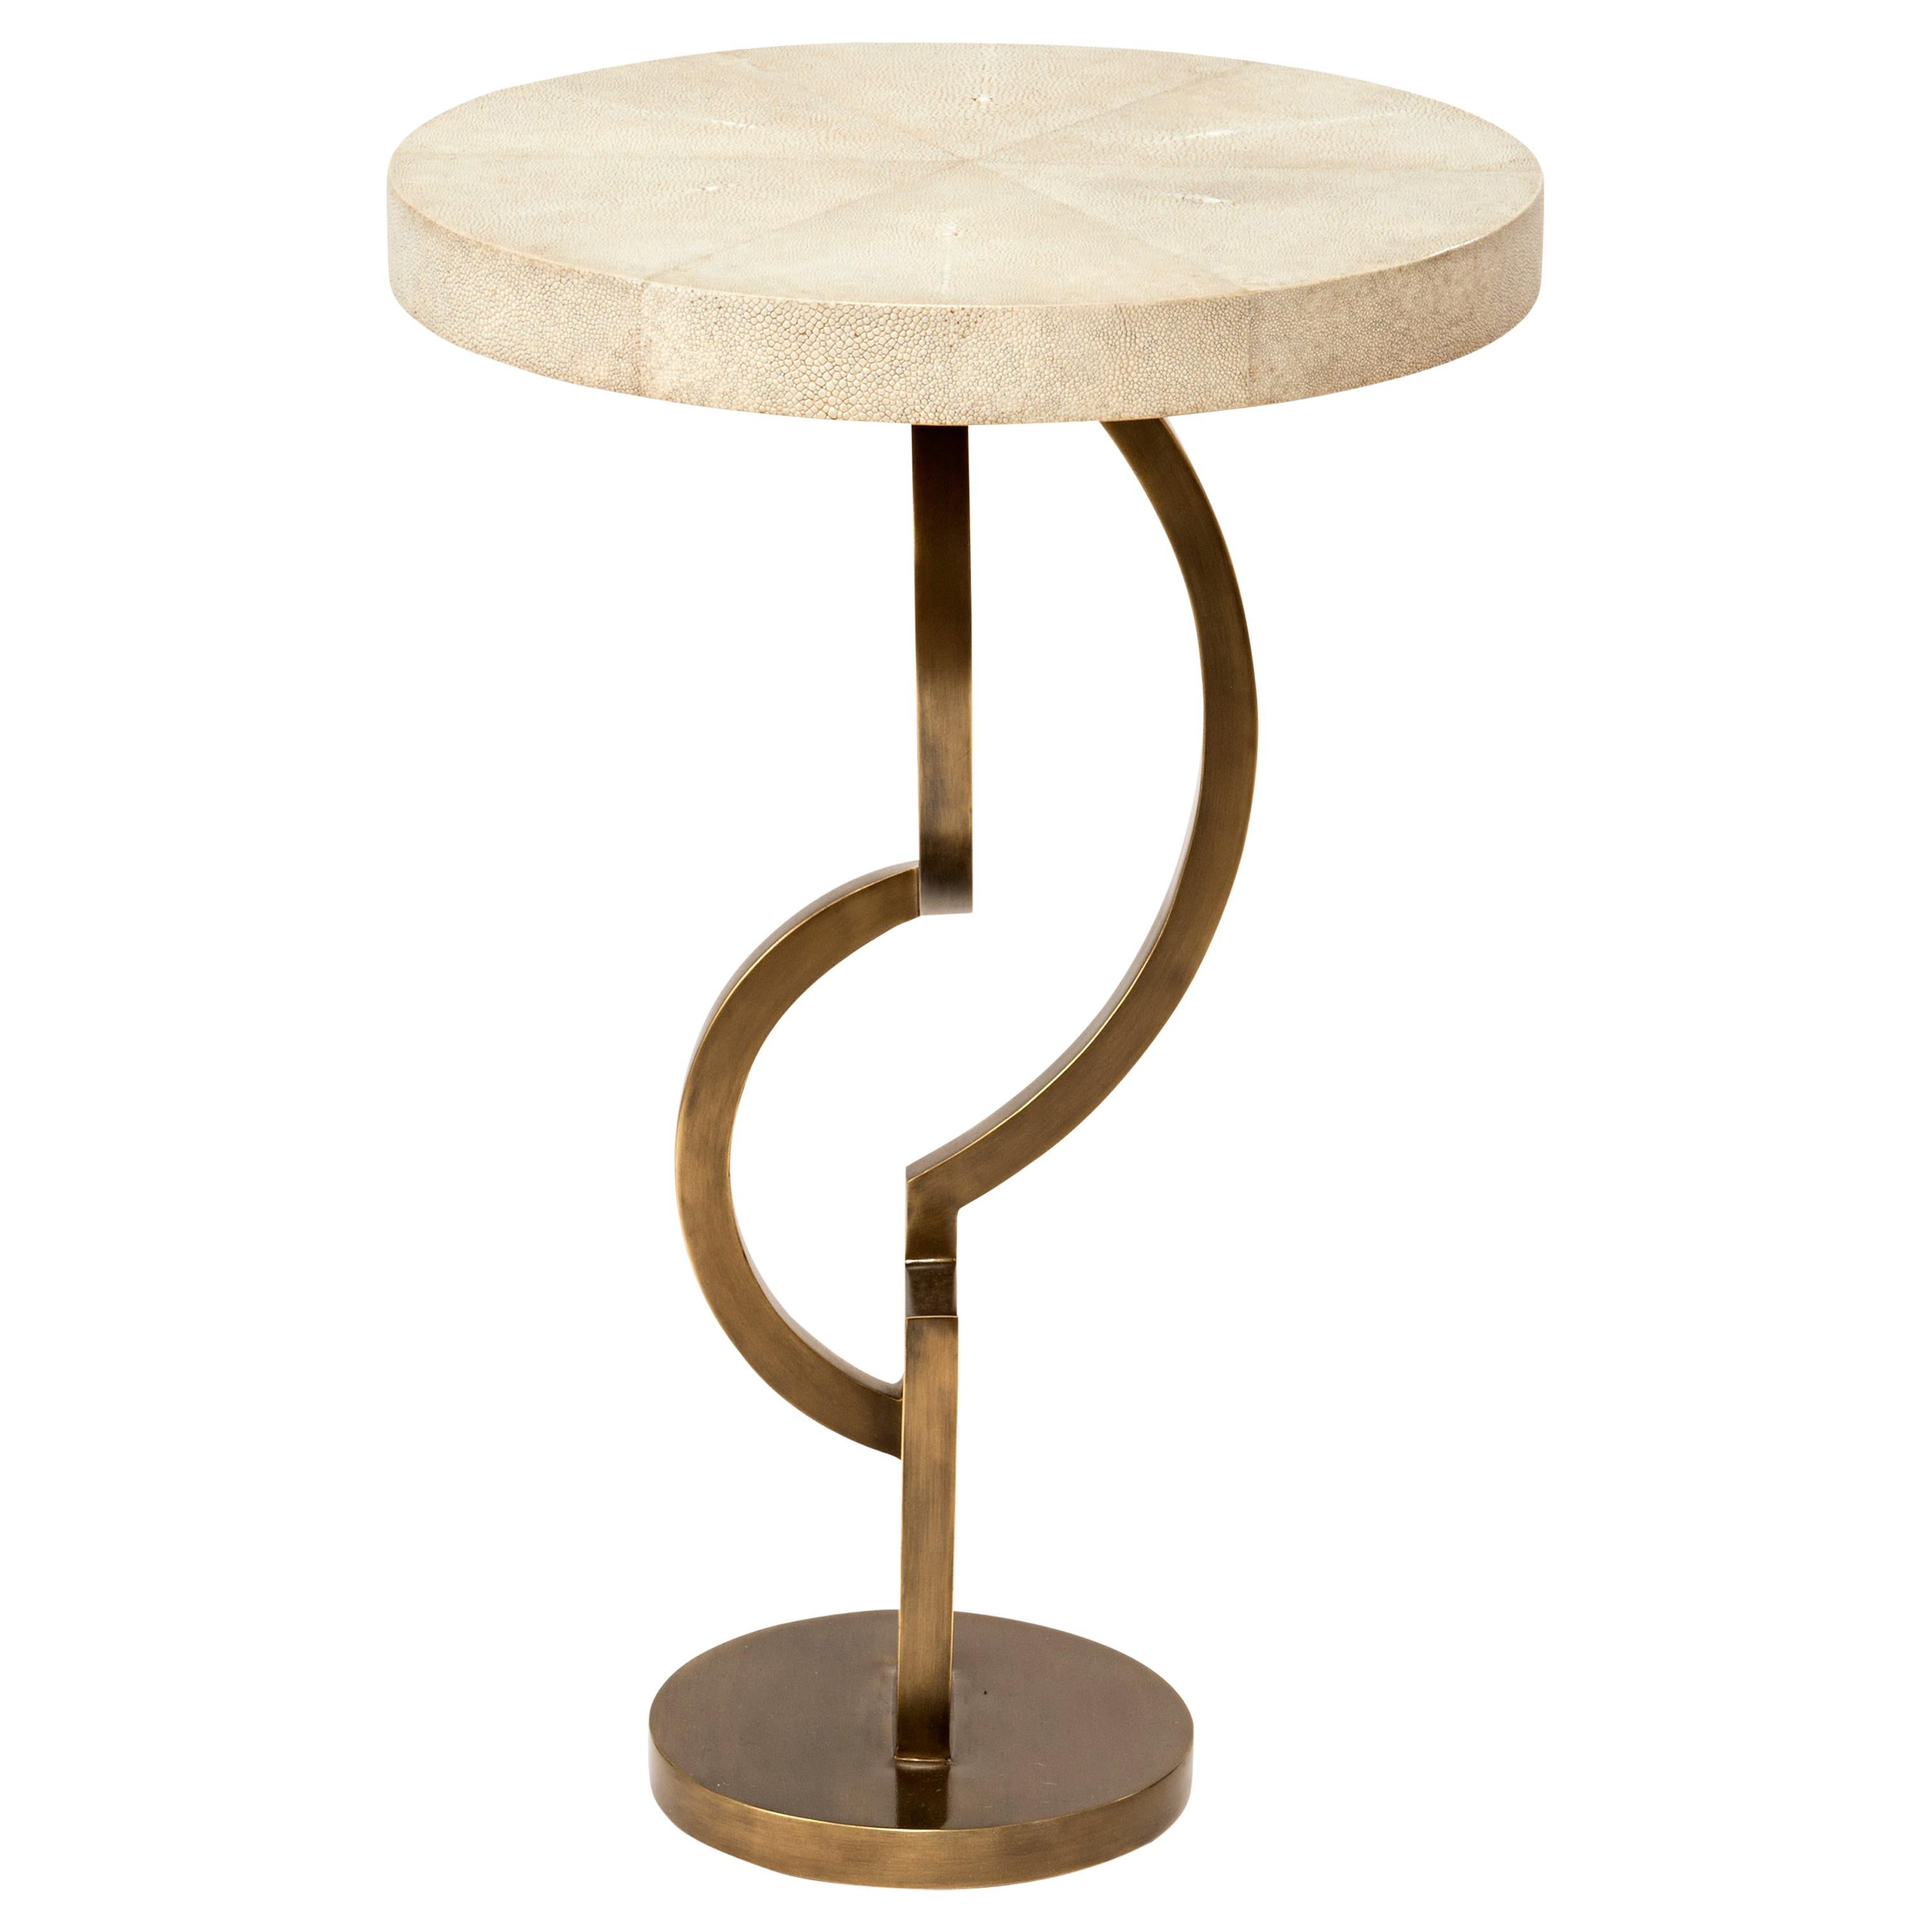 Dancer Side Table in Cream Shagreen and Bronze-Patina Brass, R & Y Augousti